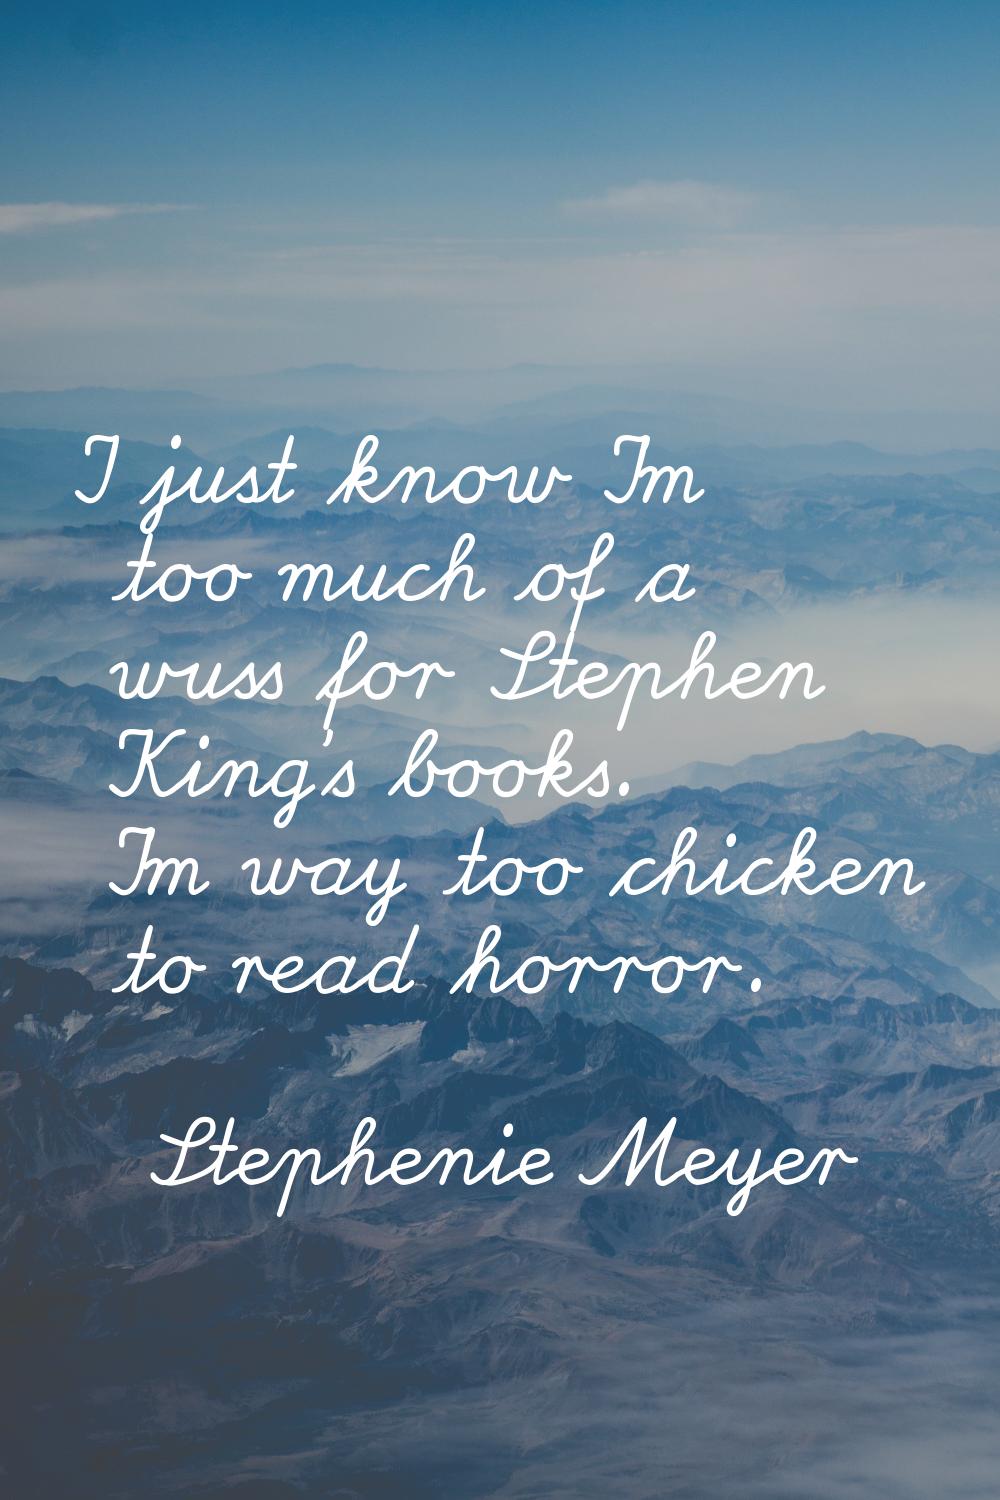 I just know I'm too much of a wuss for Stephen King's books. I'm way too chicken to read horror.